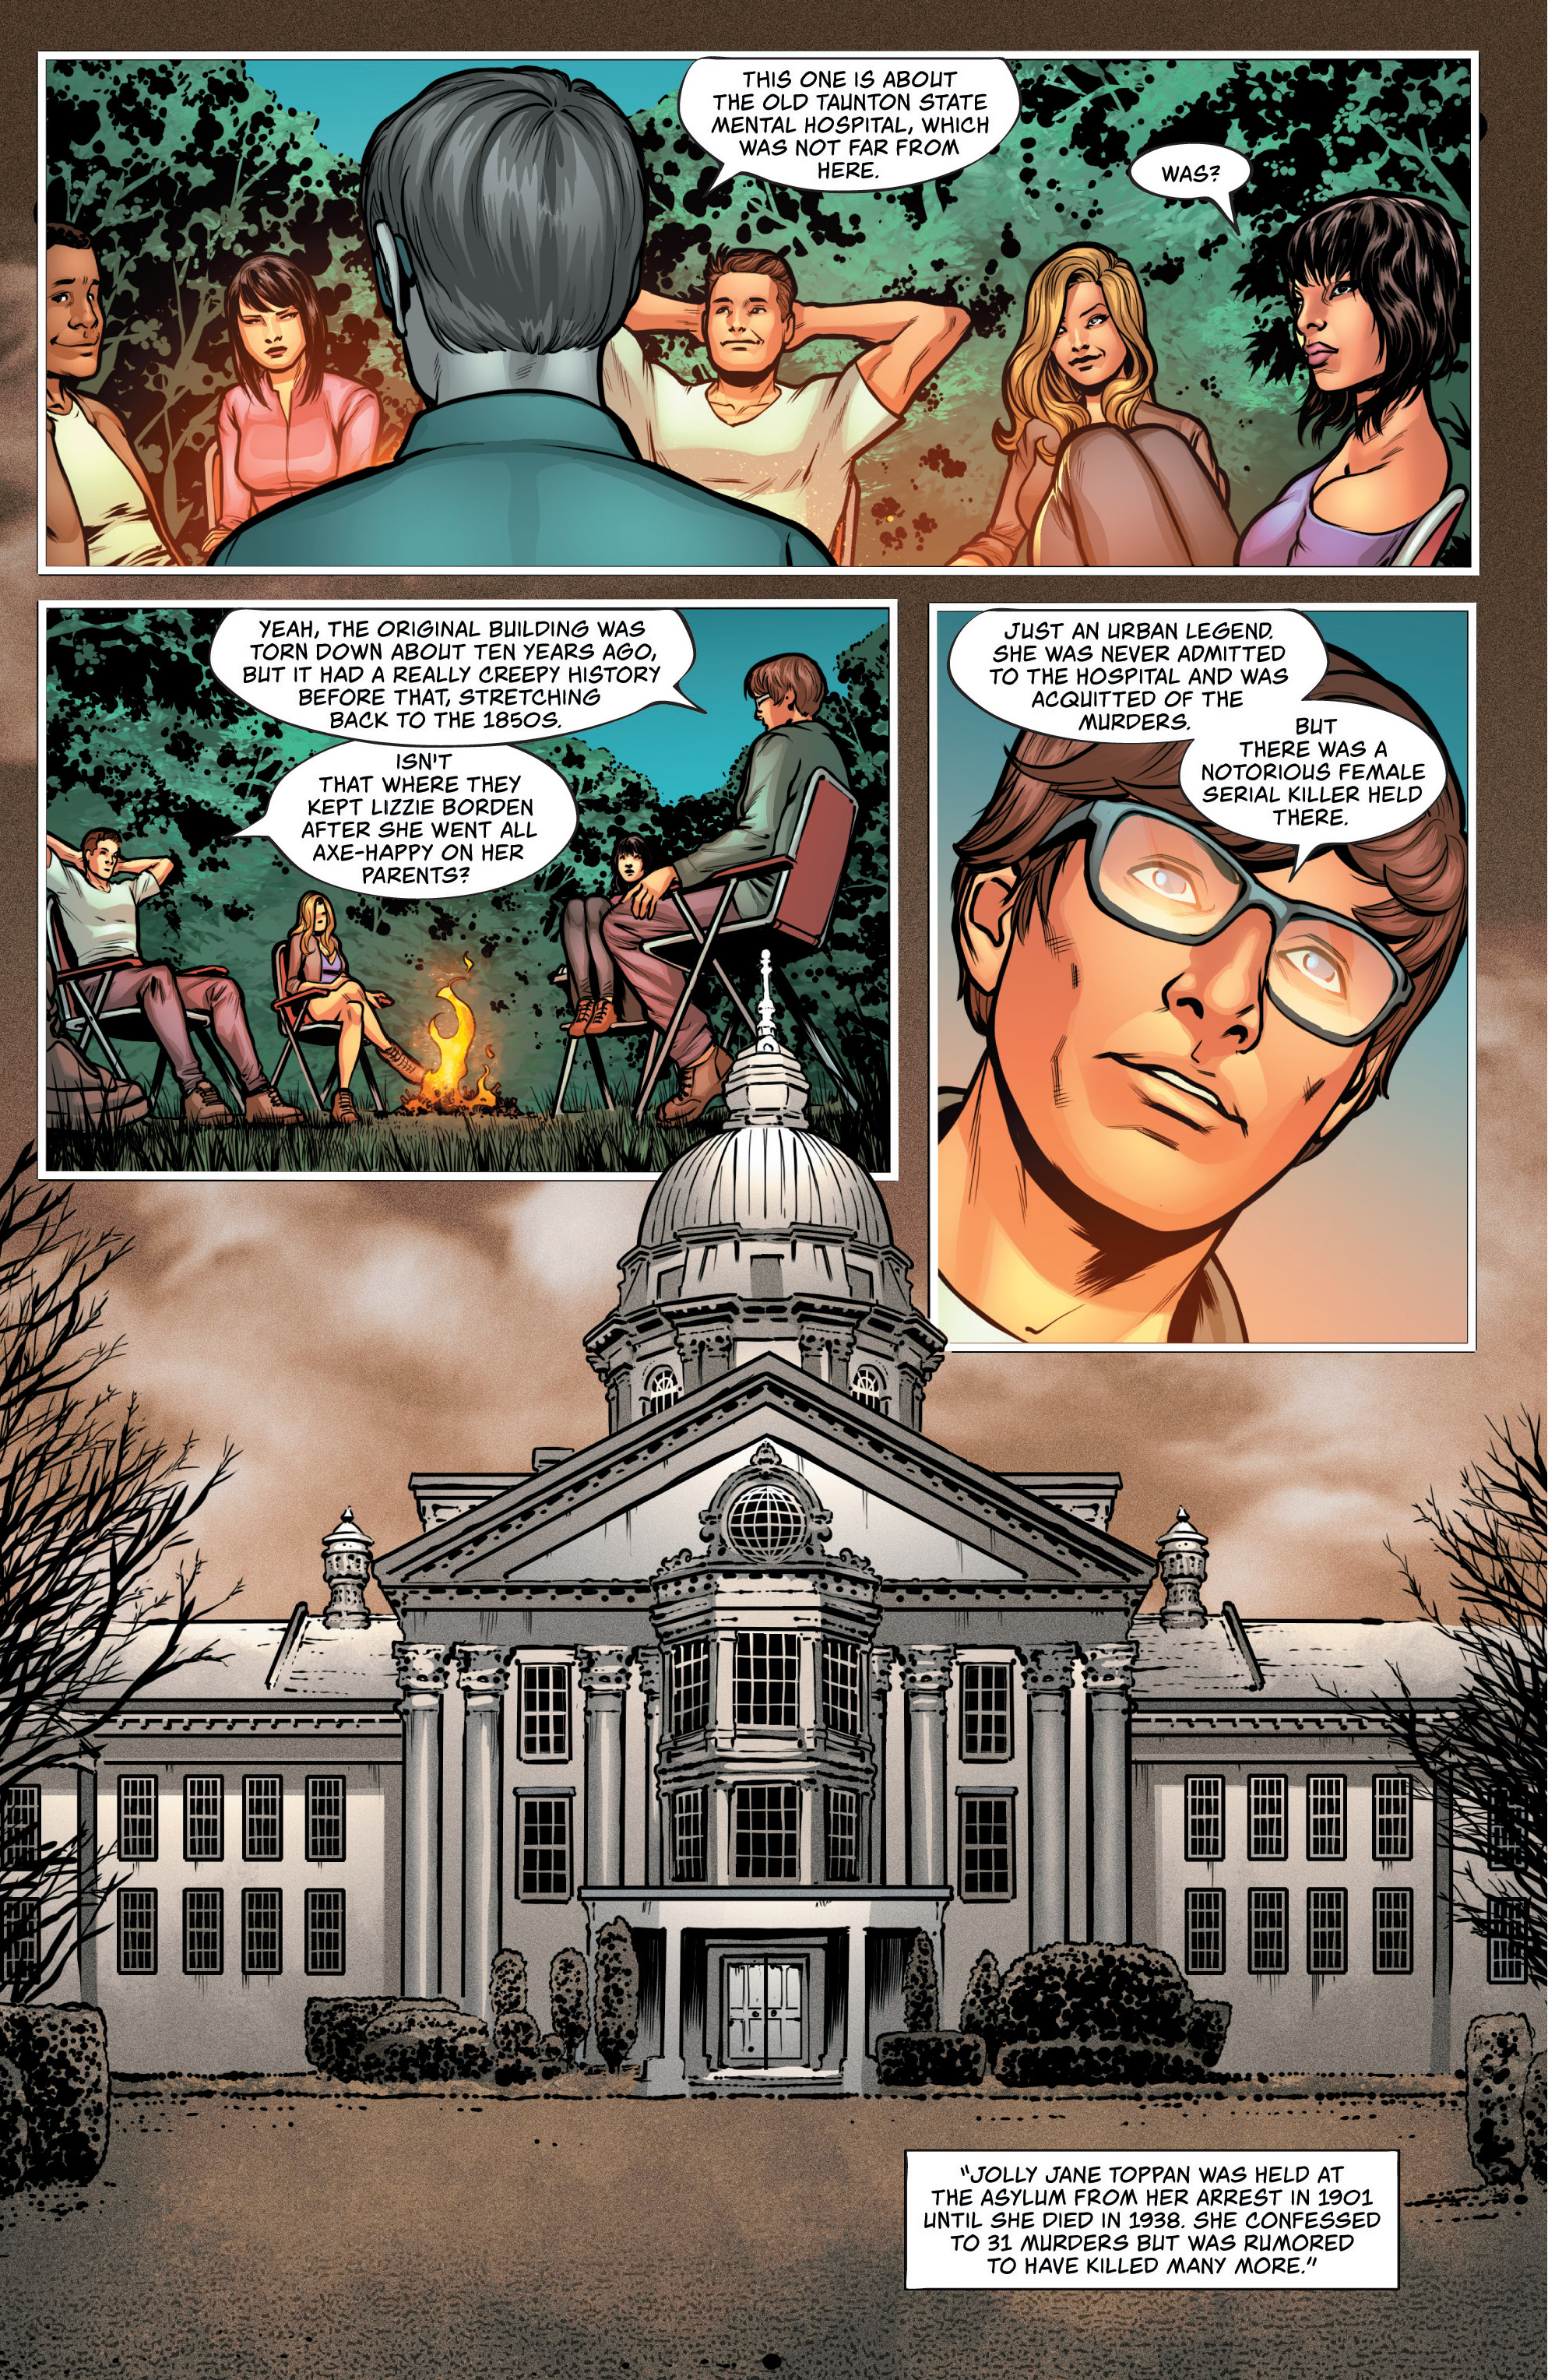 Grimm Tales of Terror: The Bridgewater Triangle (2019-): Chapter 2 - Page 4